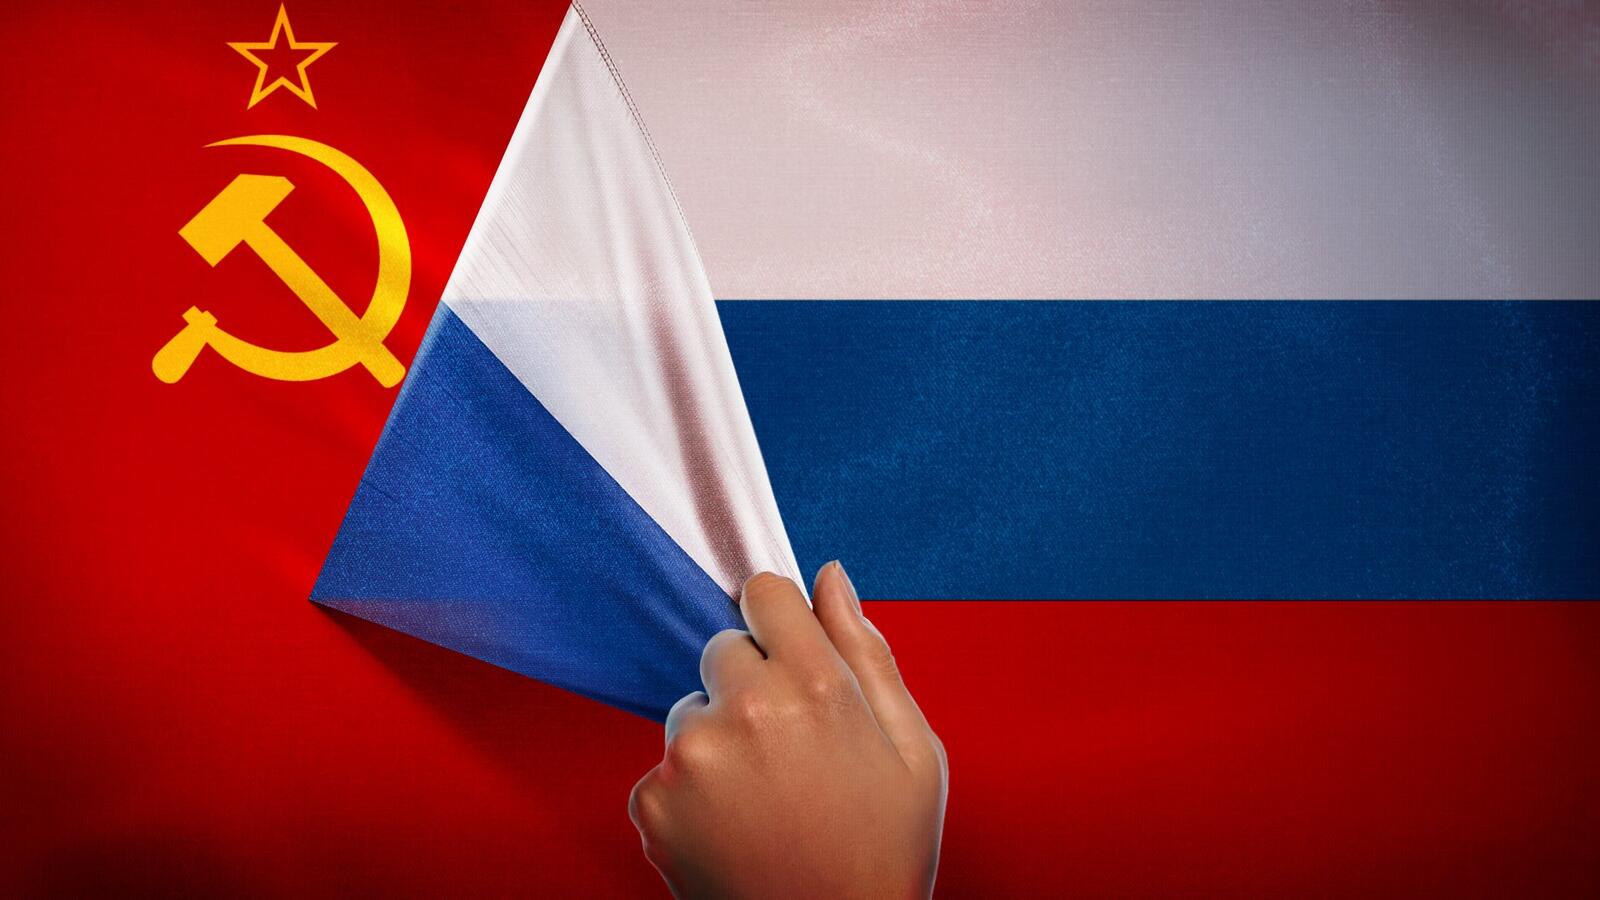 Wallpapers flag USSR Russia on the desktop